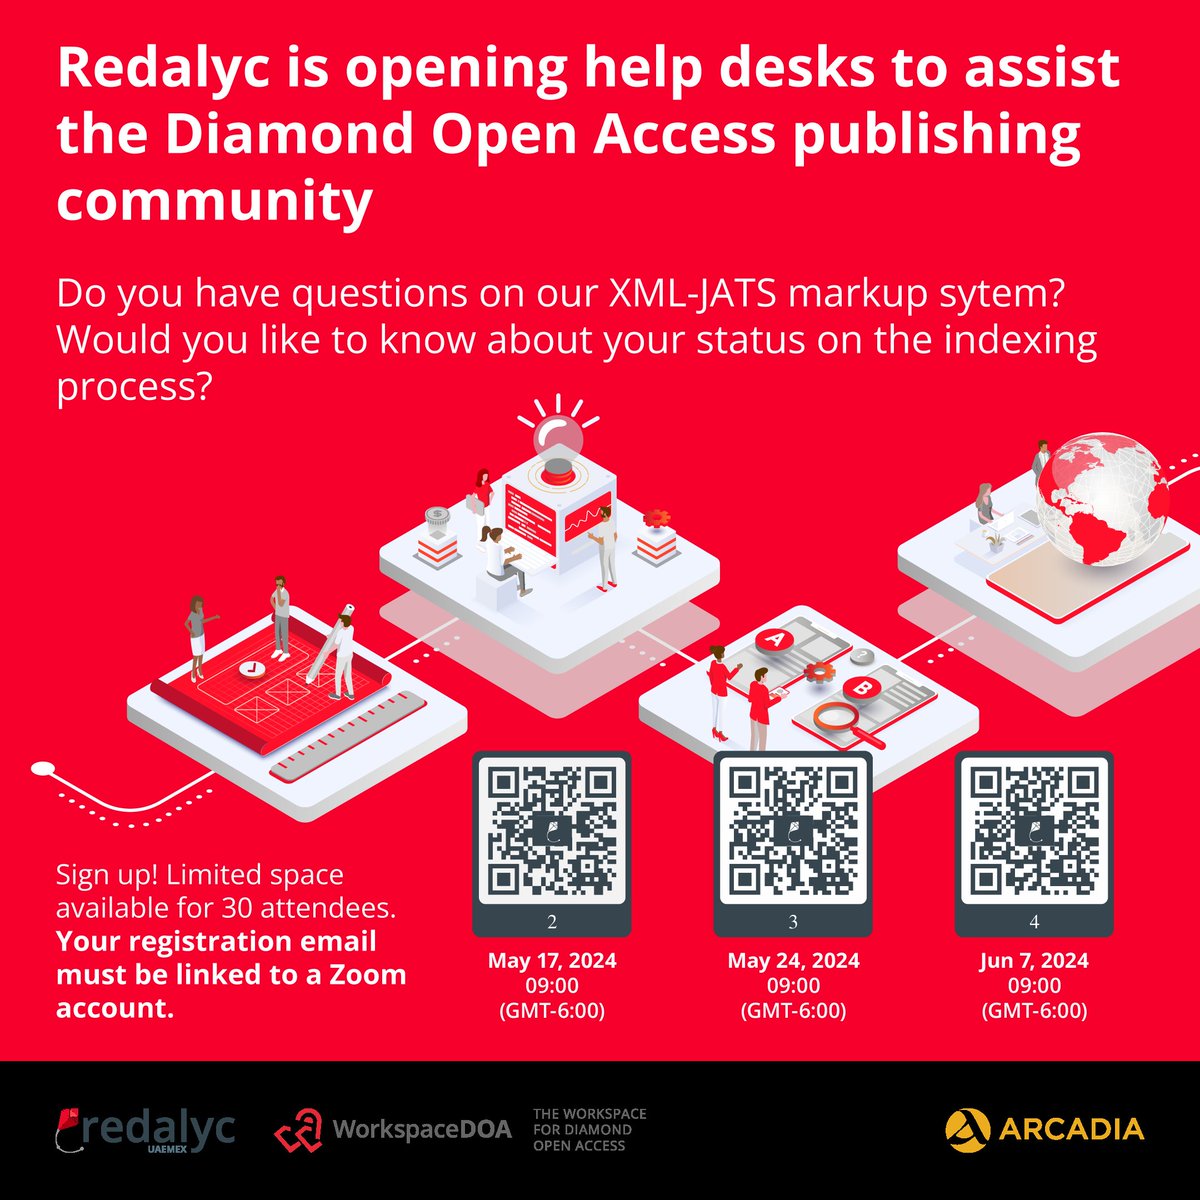 ⭕️ Editorial community of Journals Indexed in @Redalyc @UAEM_MX. Your work is our priority! ✨
We share upcoming dates for 'Help desk to assist the #DiamondOA publishing community'.  
We suggest you register in advance as spots are limited. 👥🗓️